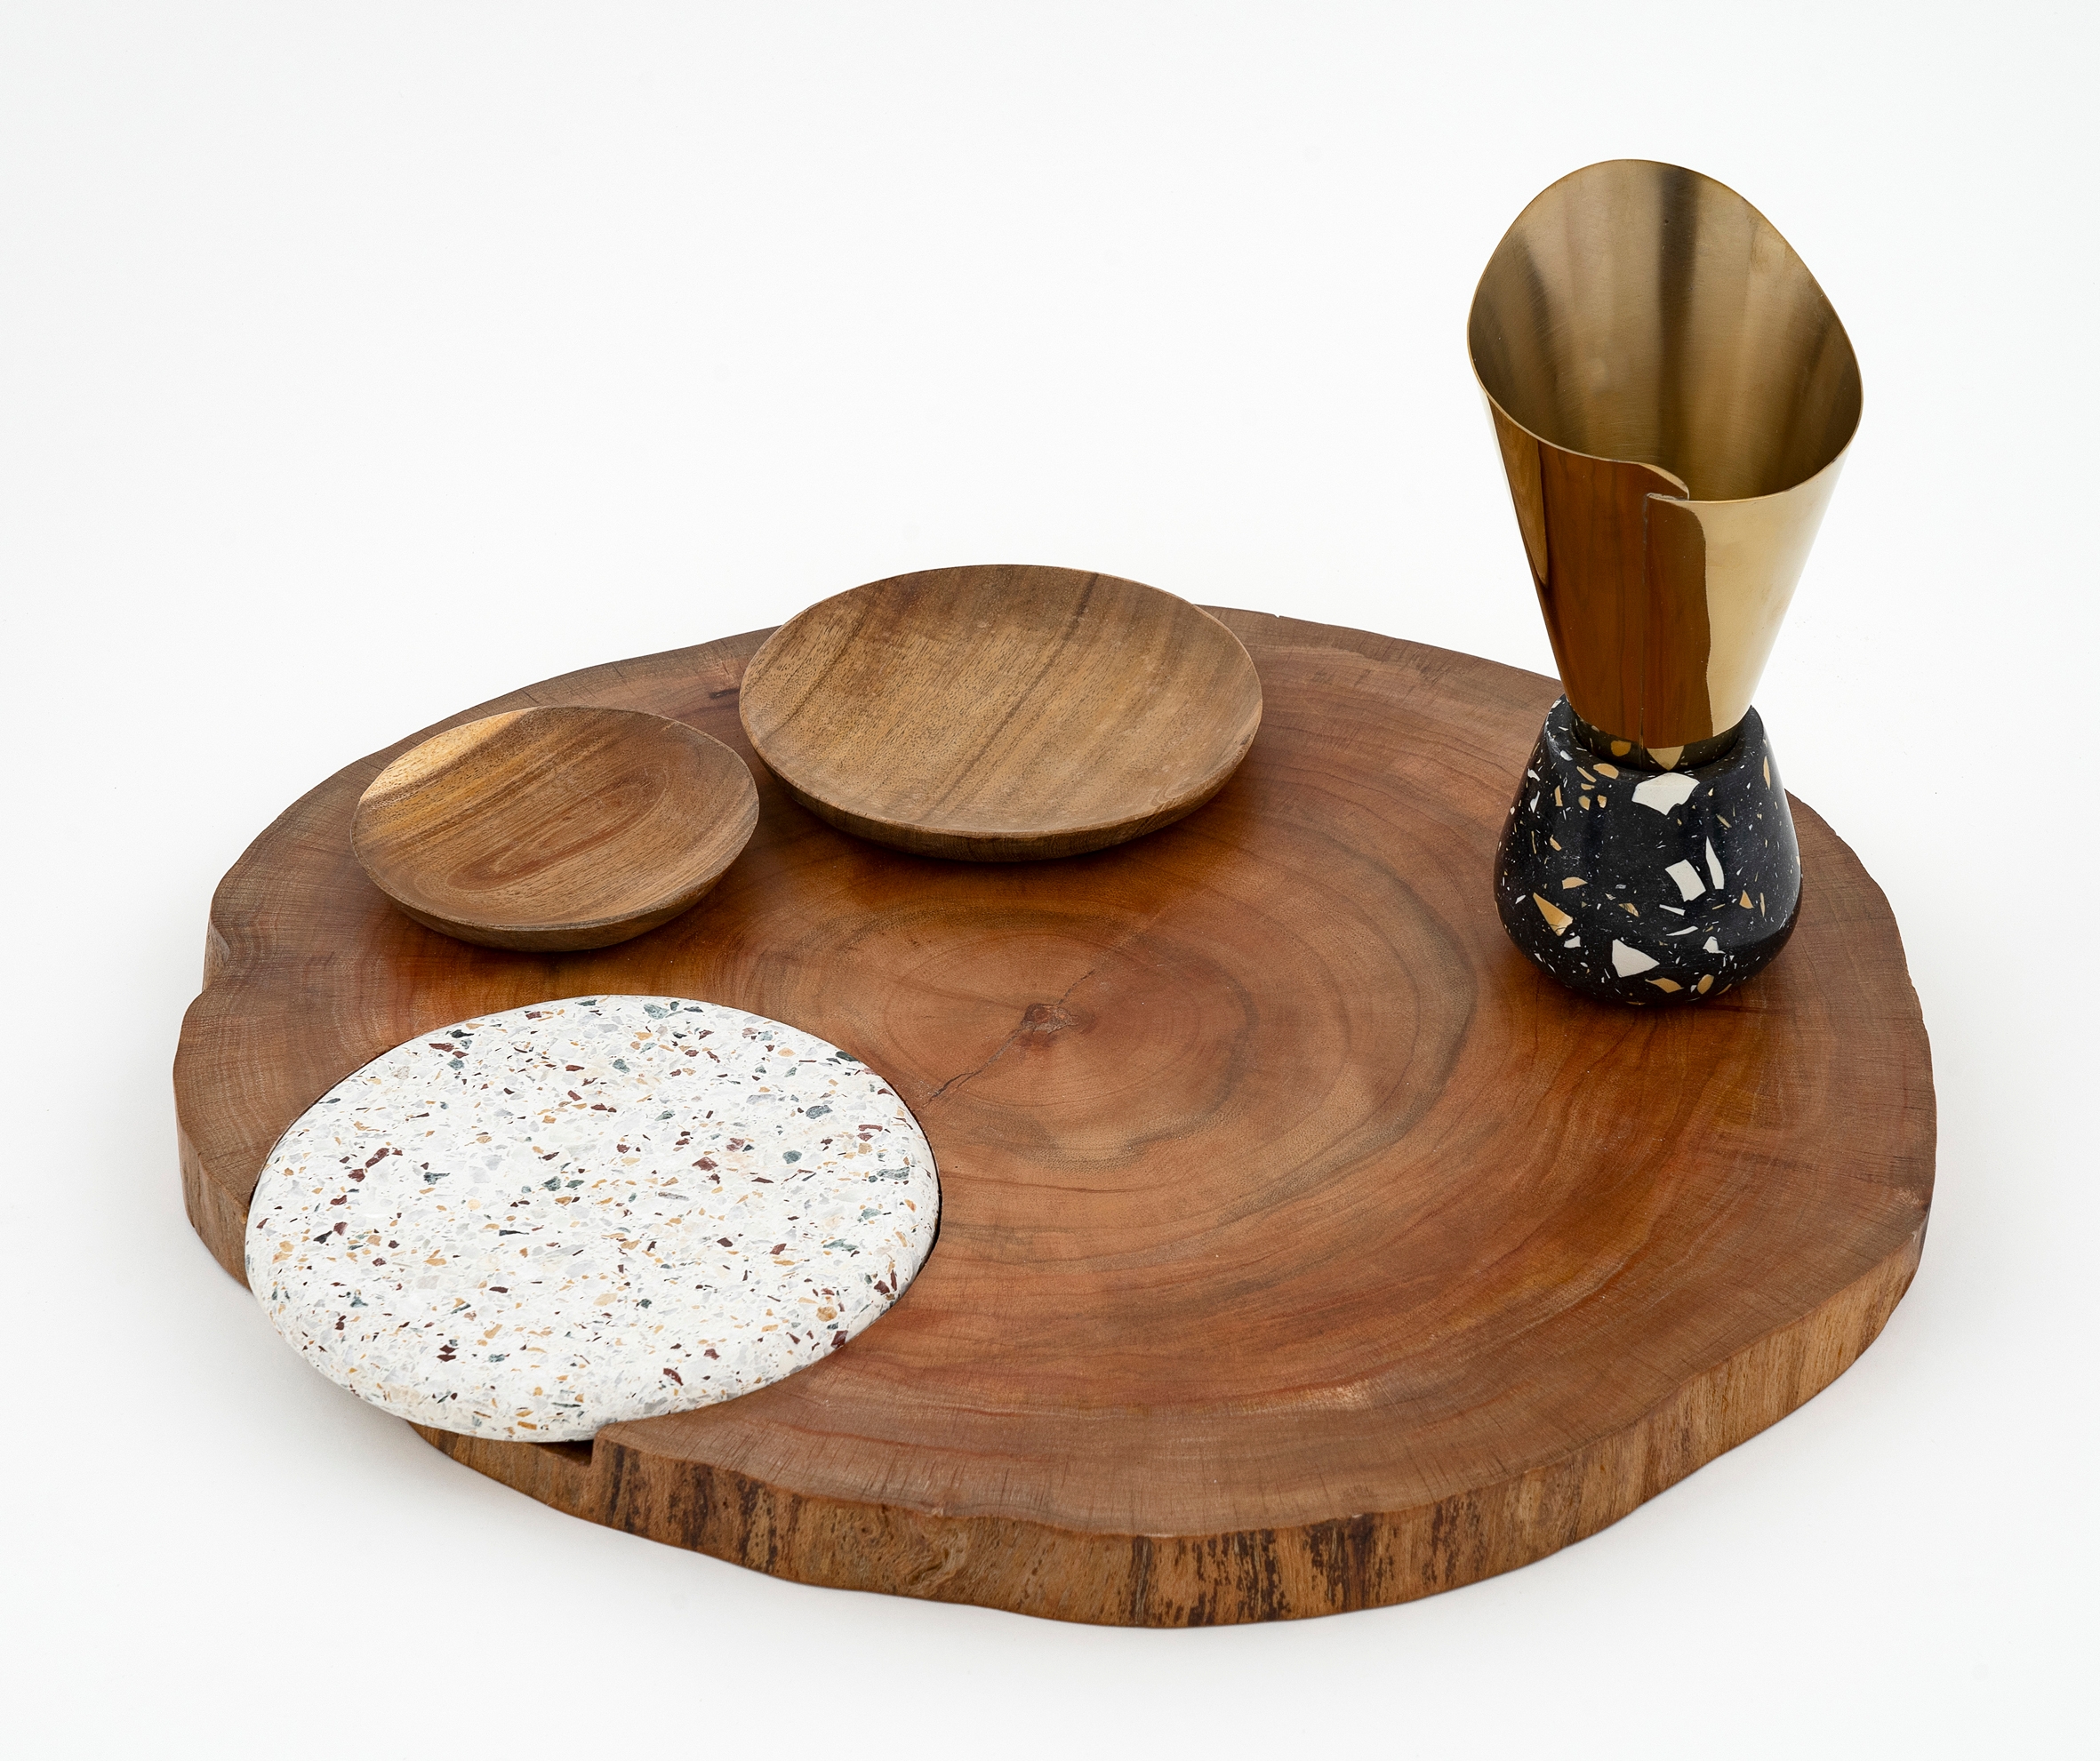 Askew Terrazzo Platter with Cone with Black Terrazzo Base